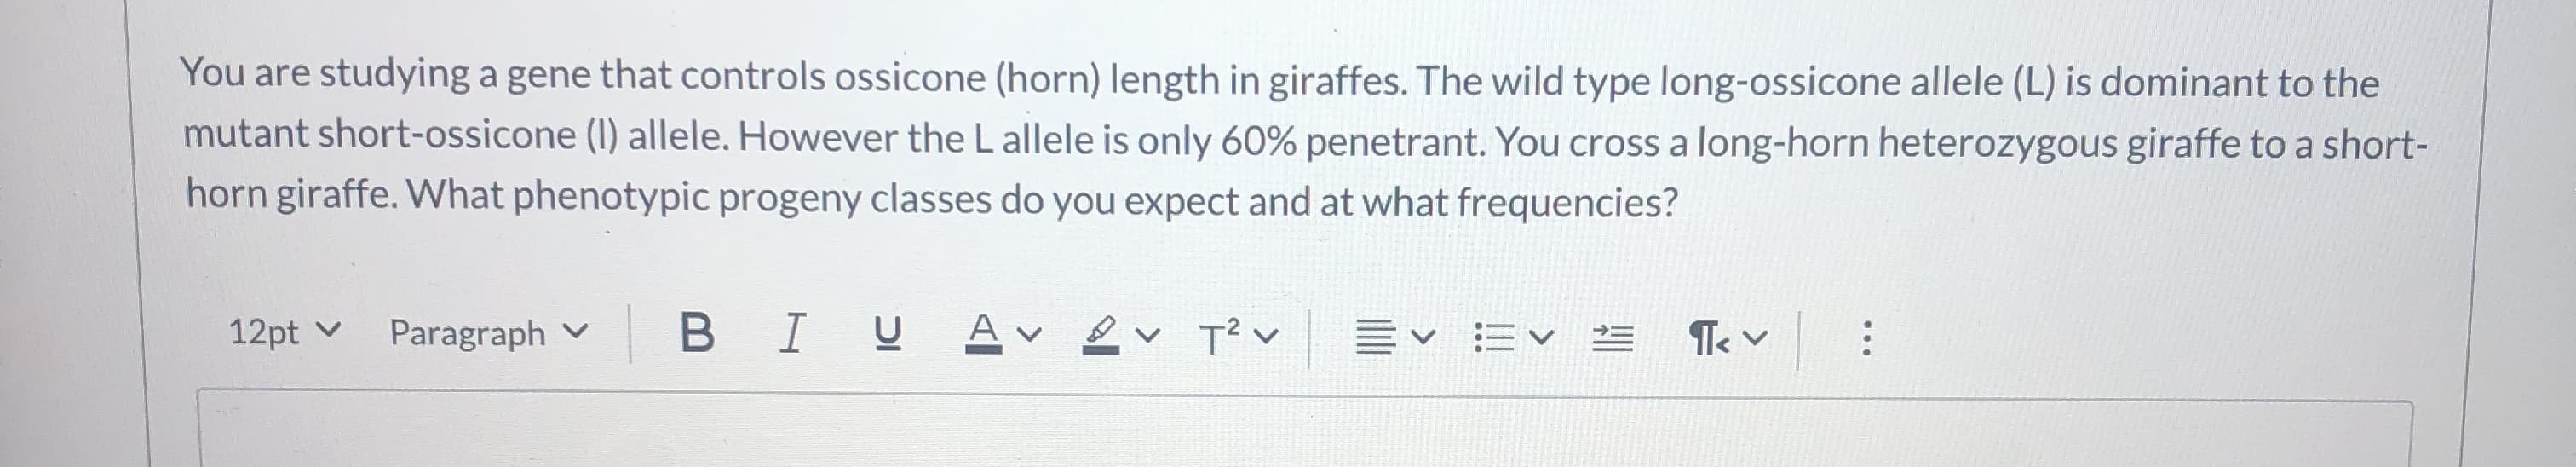 You are studying a gene that controls ossicone (horn) length in giraffes. The wild type long-ossicone allele (L) is dominant to the
mutant short-ossicone (I) allele. However the L allele is only 60% penetrant. You cross a long-horn heterozygous giraffe to a short-
horn giraffe. What phenotypic progeny classes do you expect and at what frequencies?
